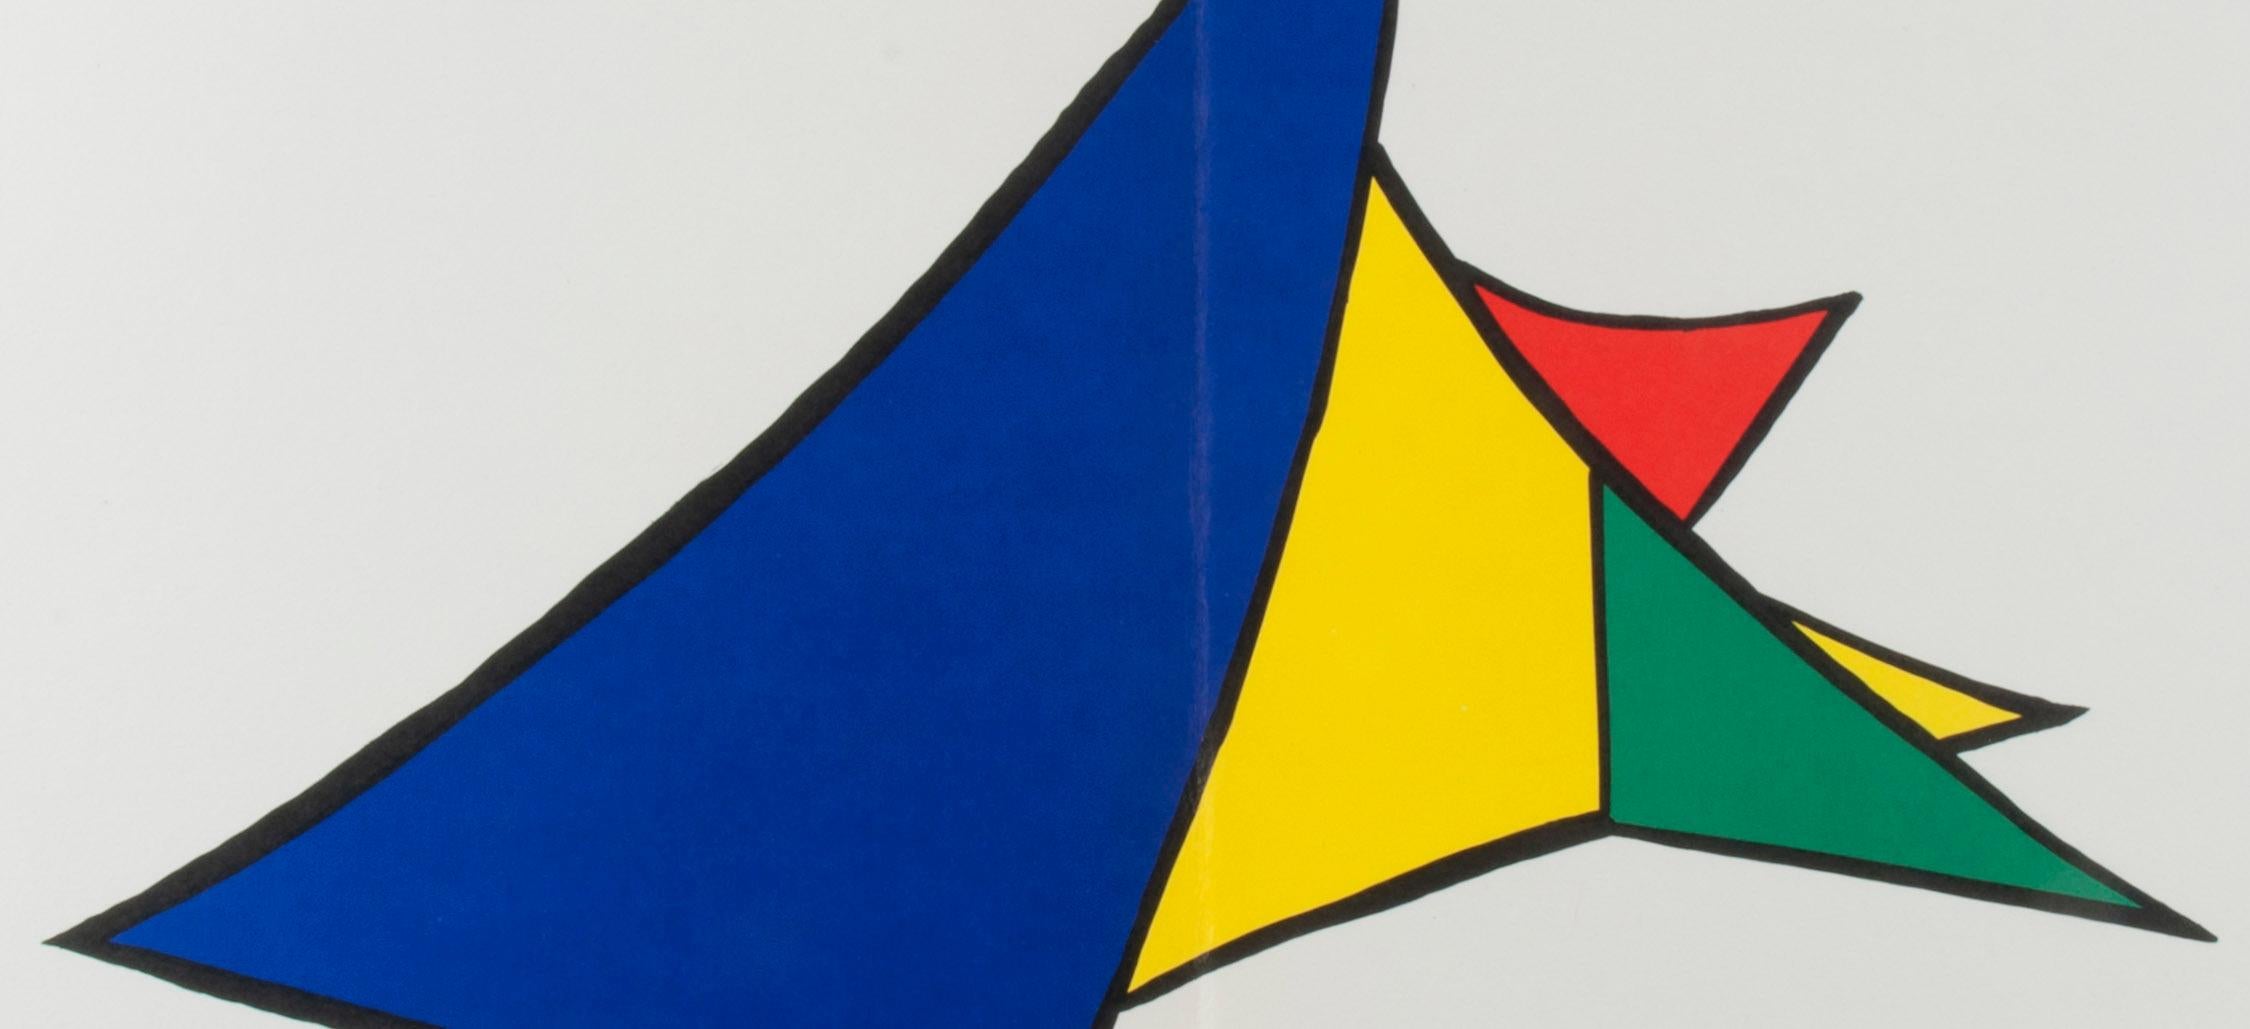 Snow-Plough (Chasse-neige) 1963 Lithograph in colors Plate 7, from DLM  - Gray Abstract Print by Alexander Calder